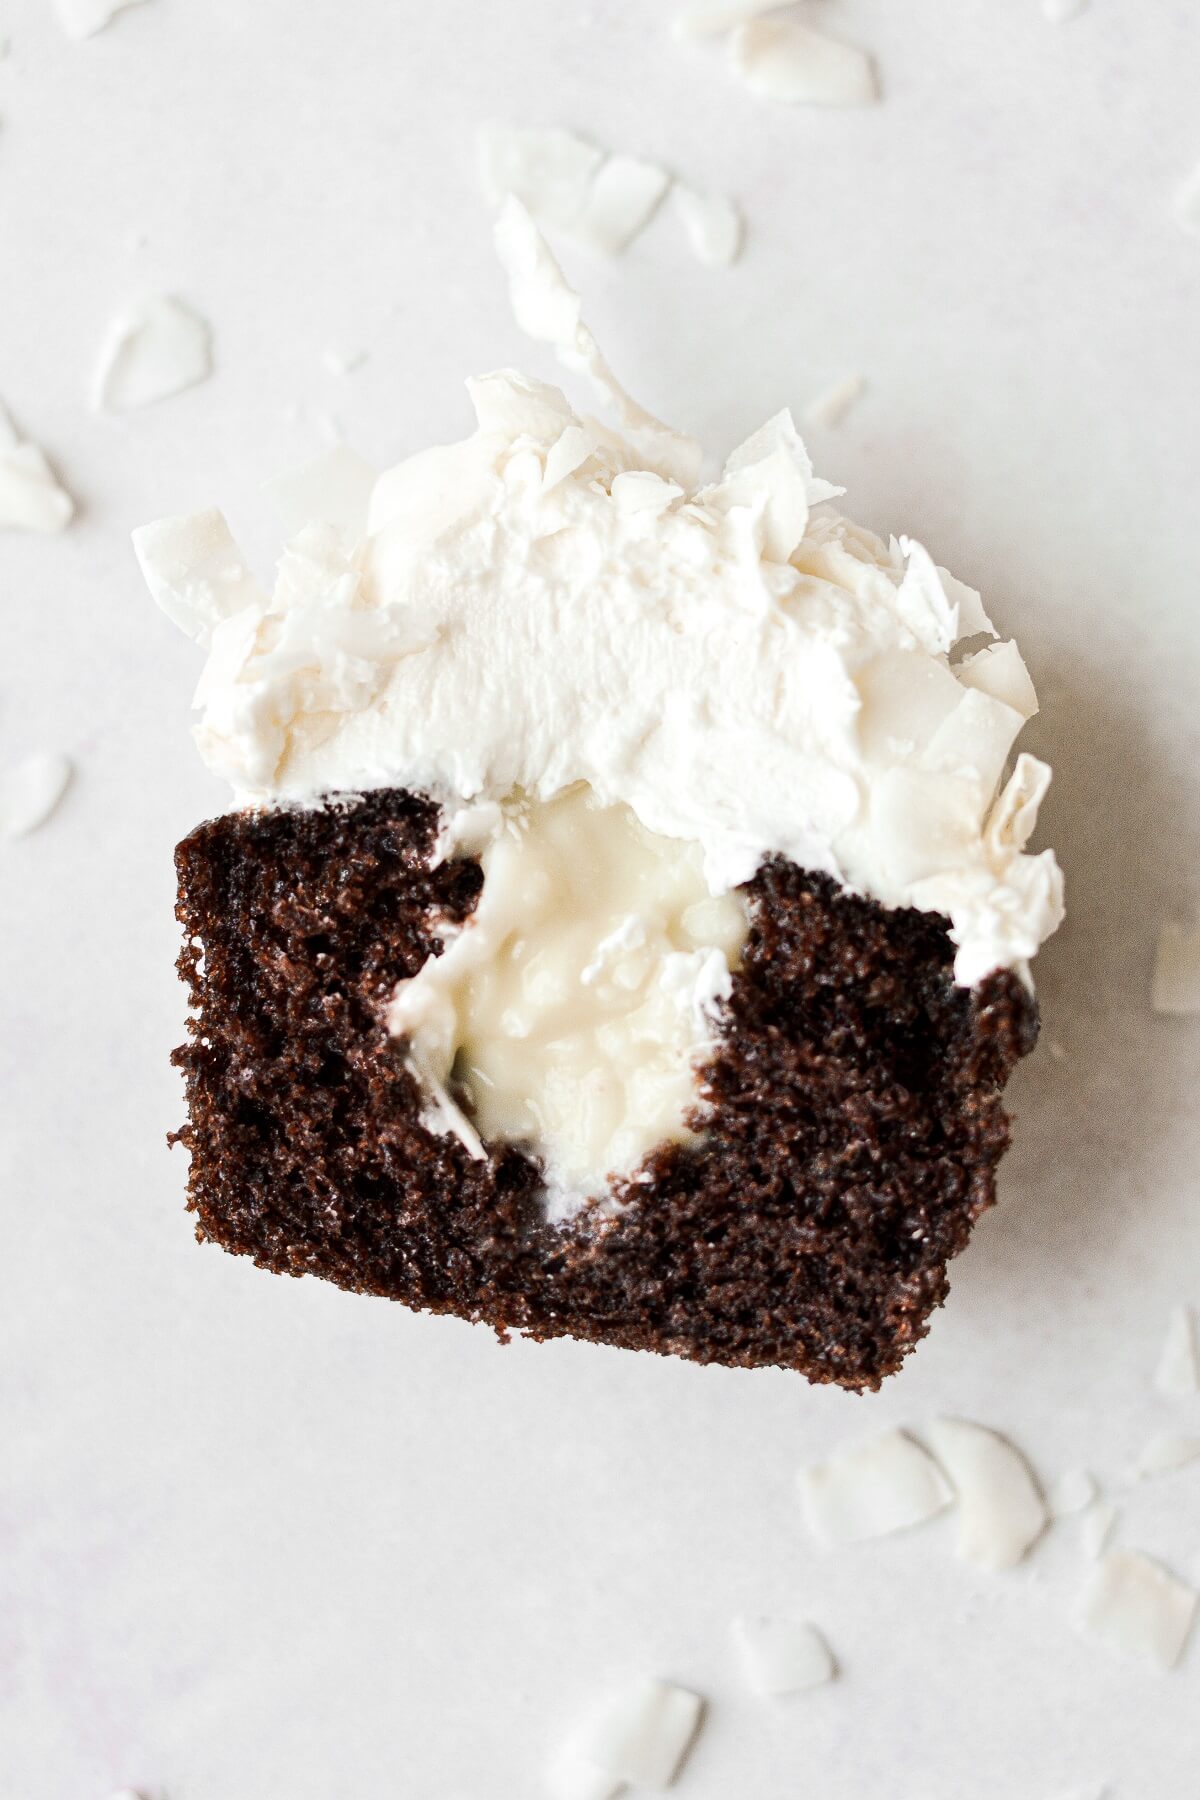 A chocolate coconut cupcake cut in half, filled with coconut custard.